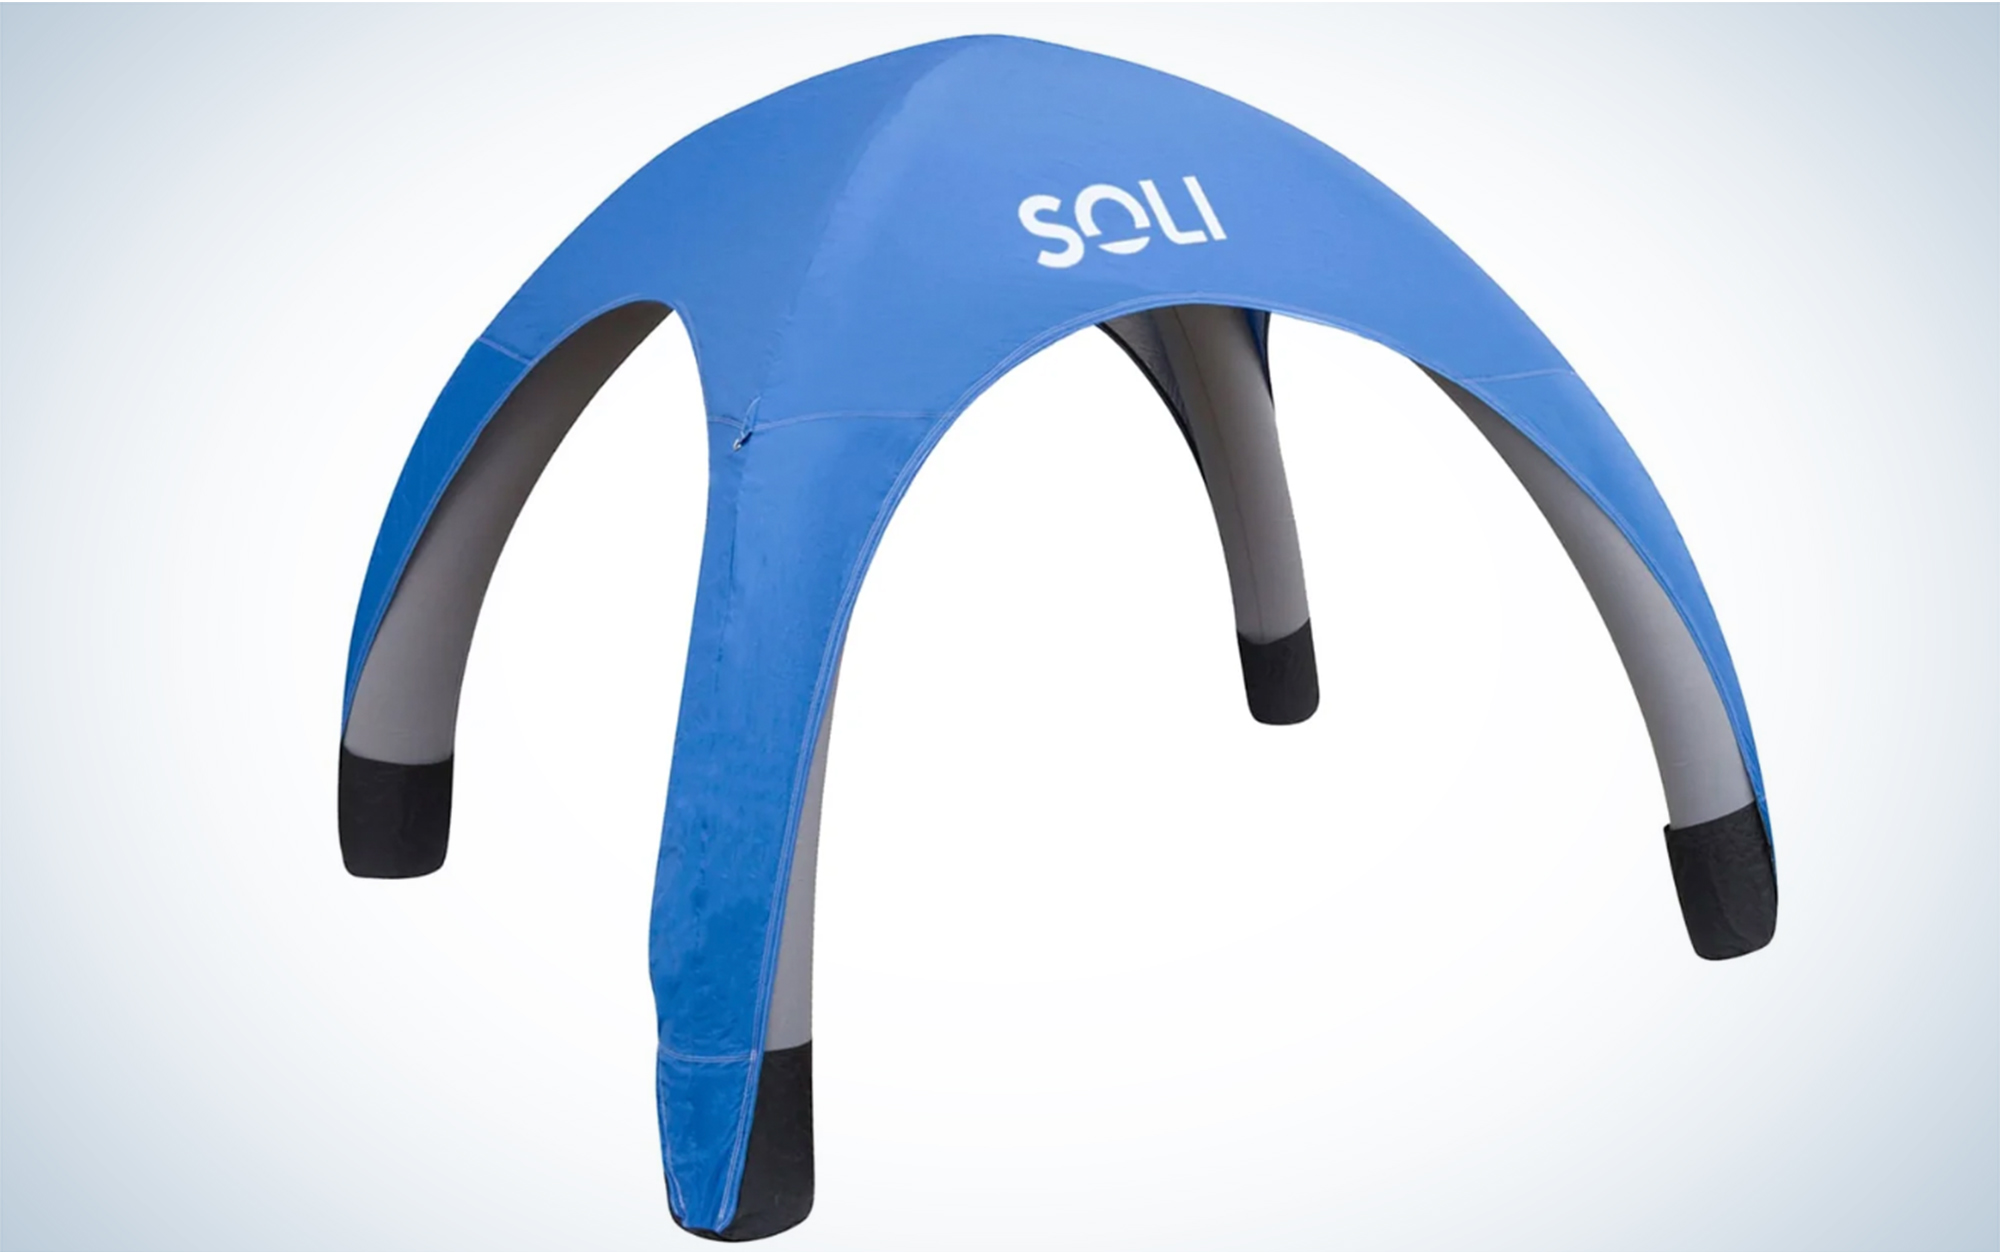 The Soli Air Canopy is one of the best canopy tents.